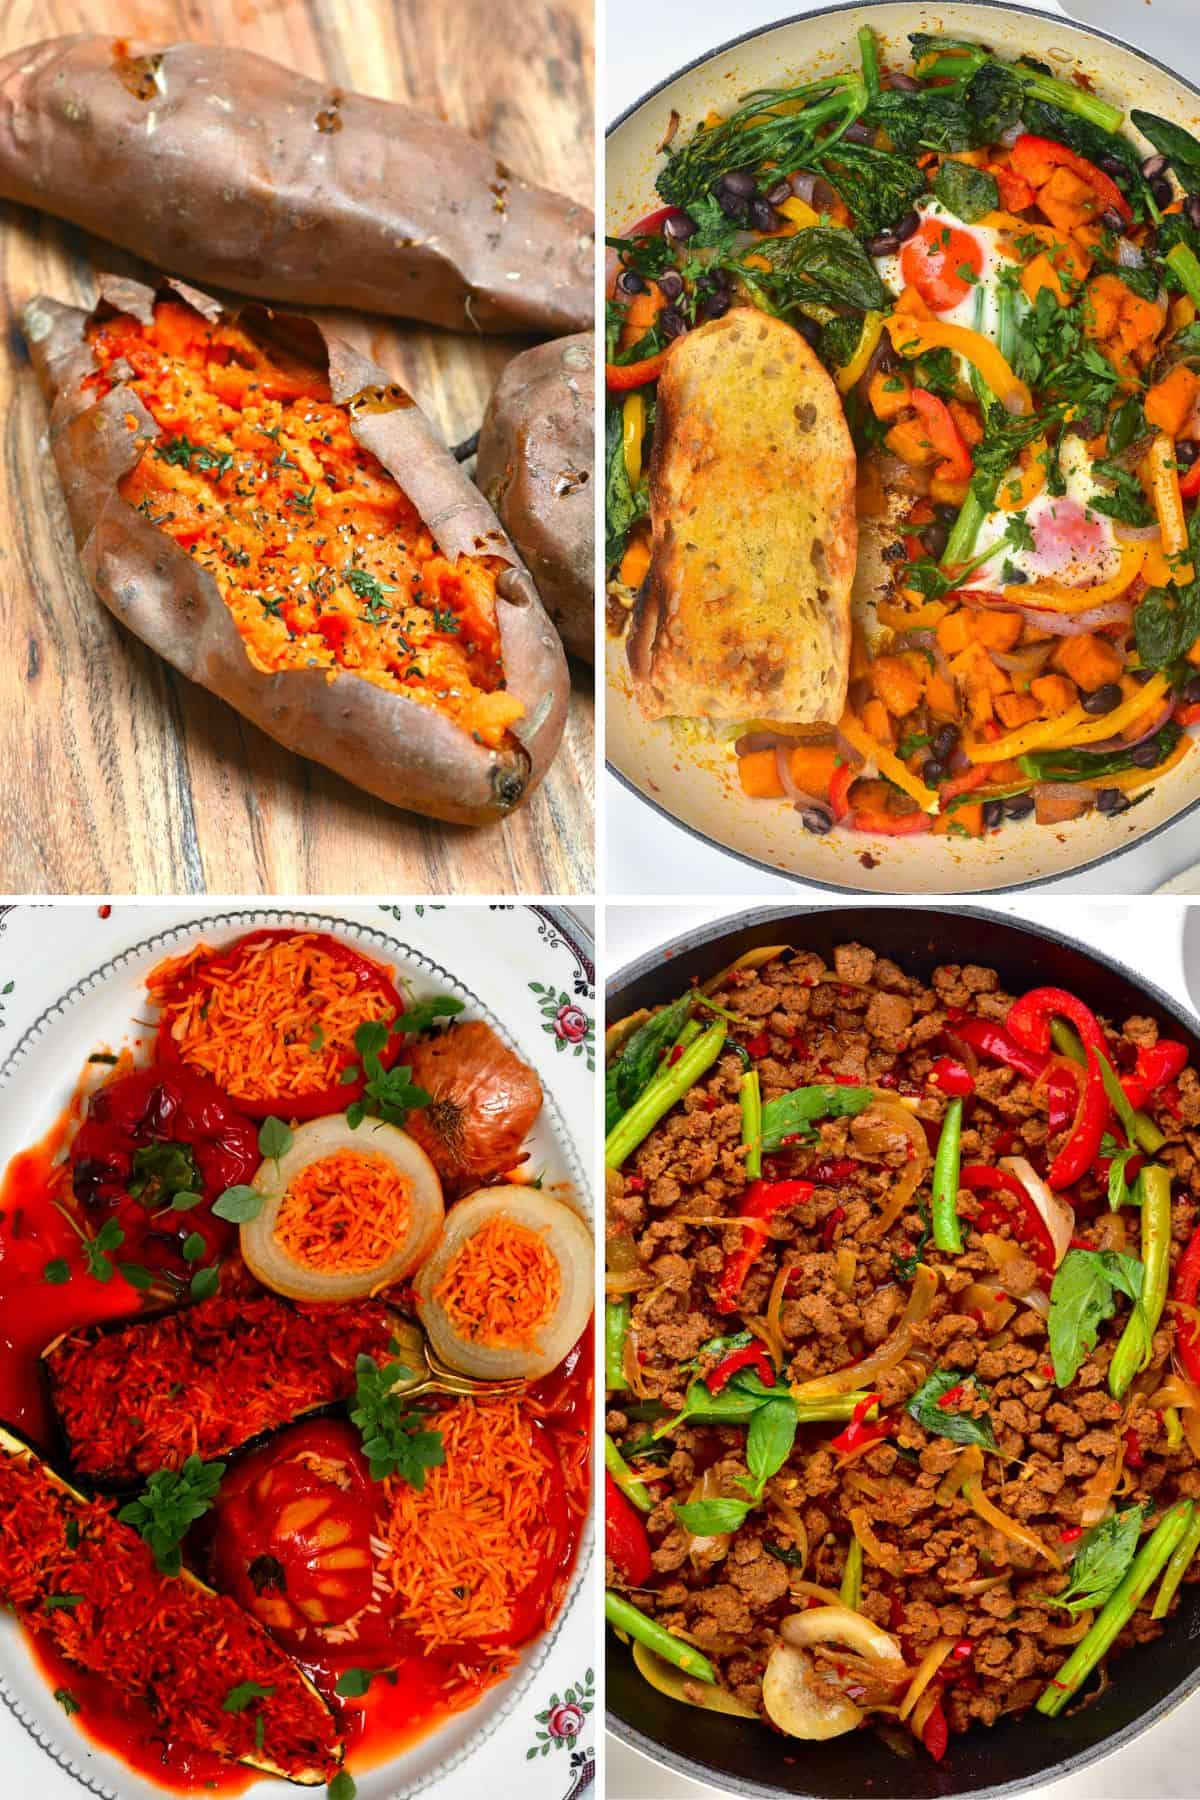 Plant-Based Hot Lunch Ideas